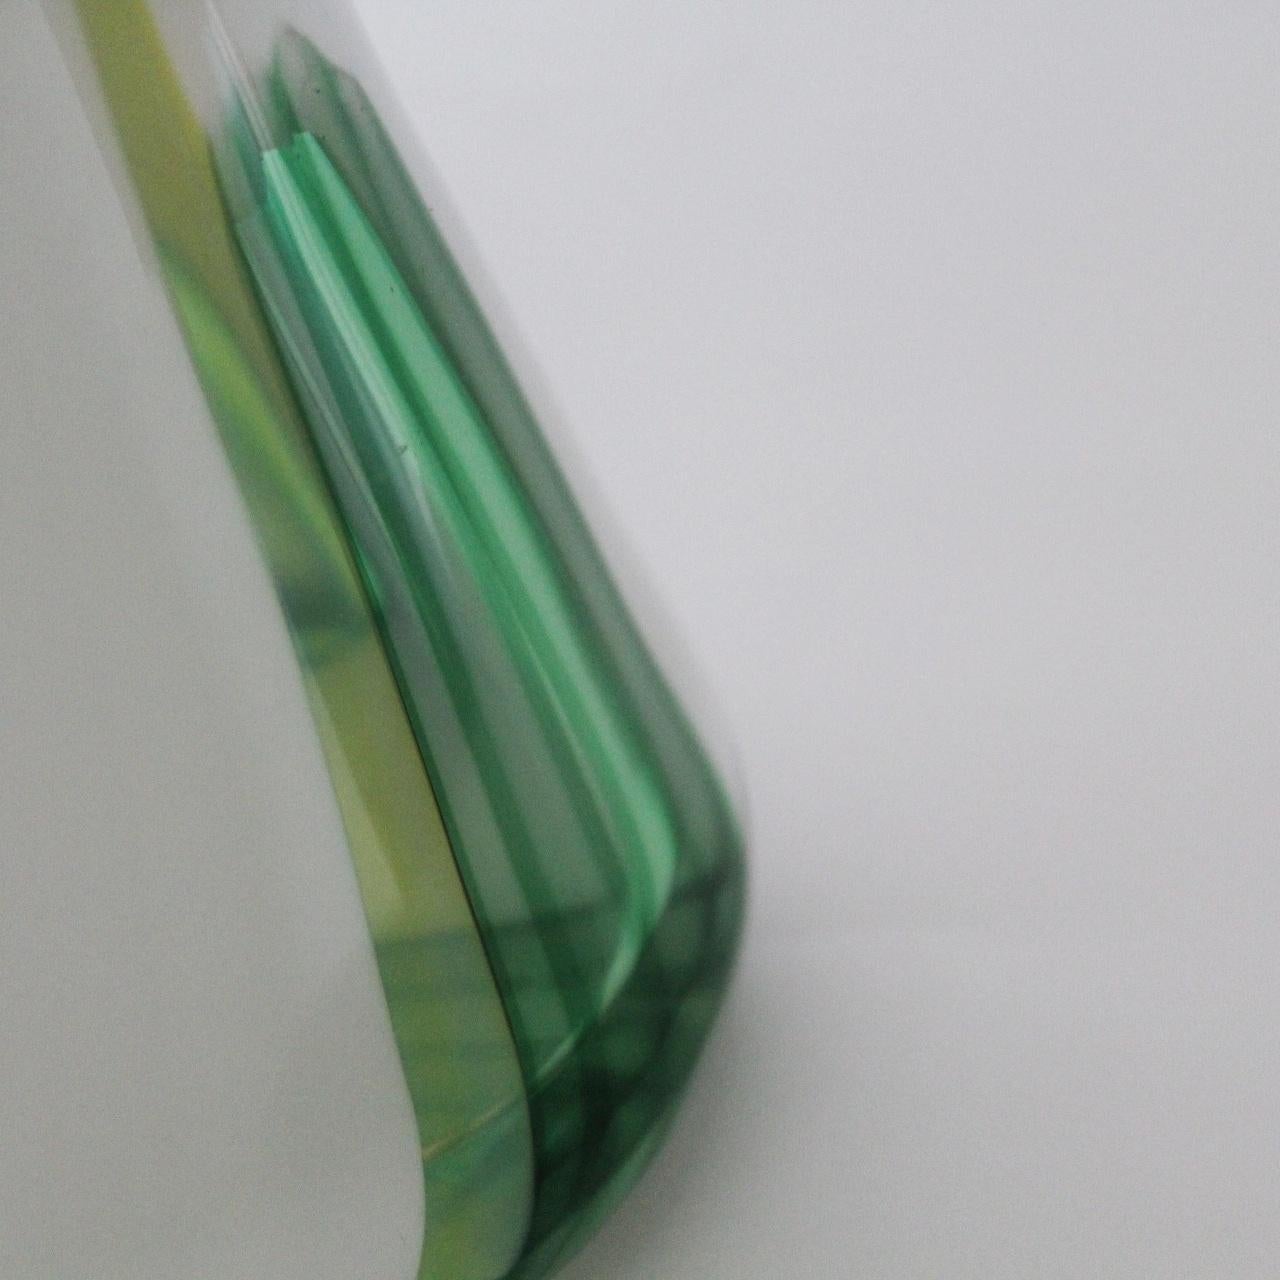 Vase realized by Anzolo Fuga for AVEM.
Lattimo and polychromes glass canes. 
Literature: 
